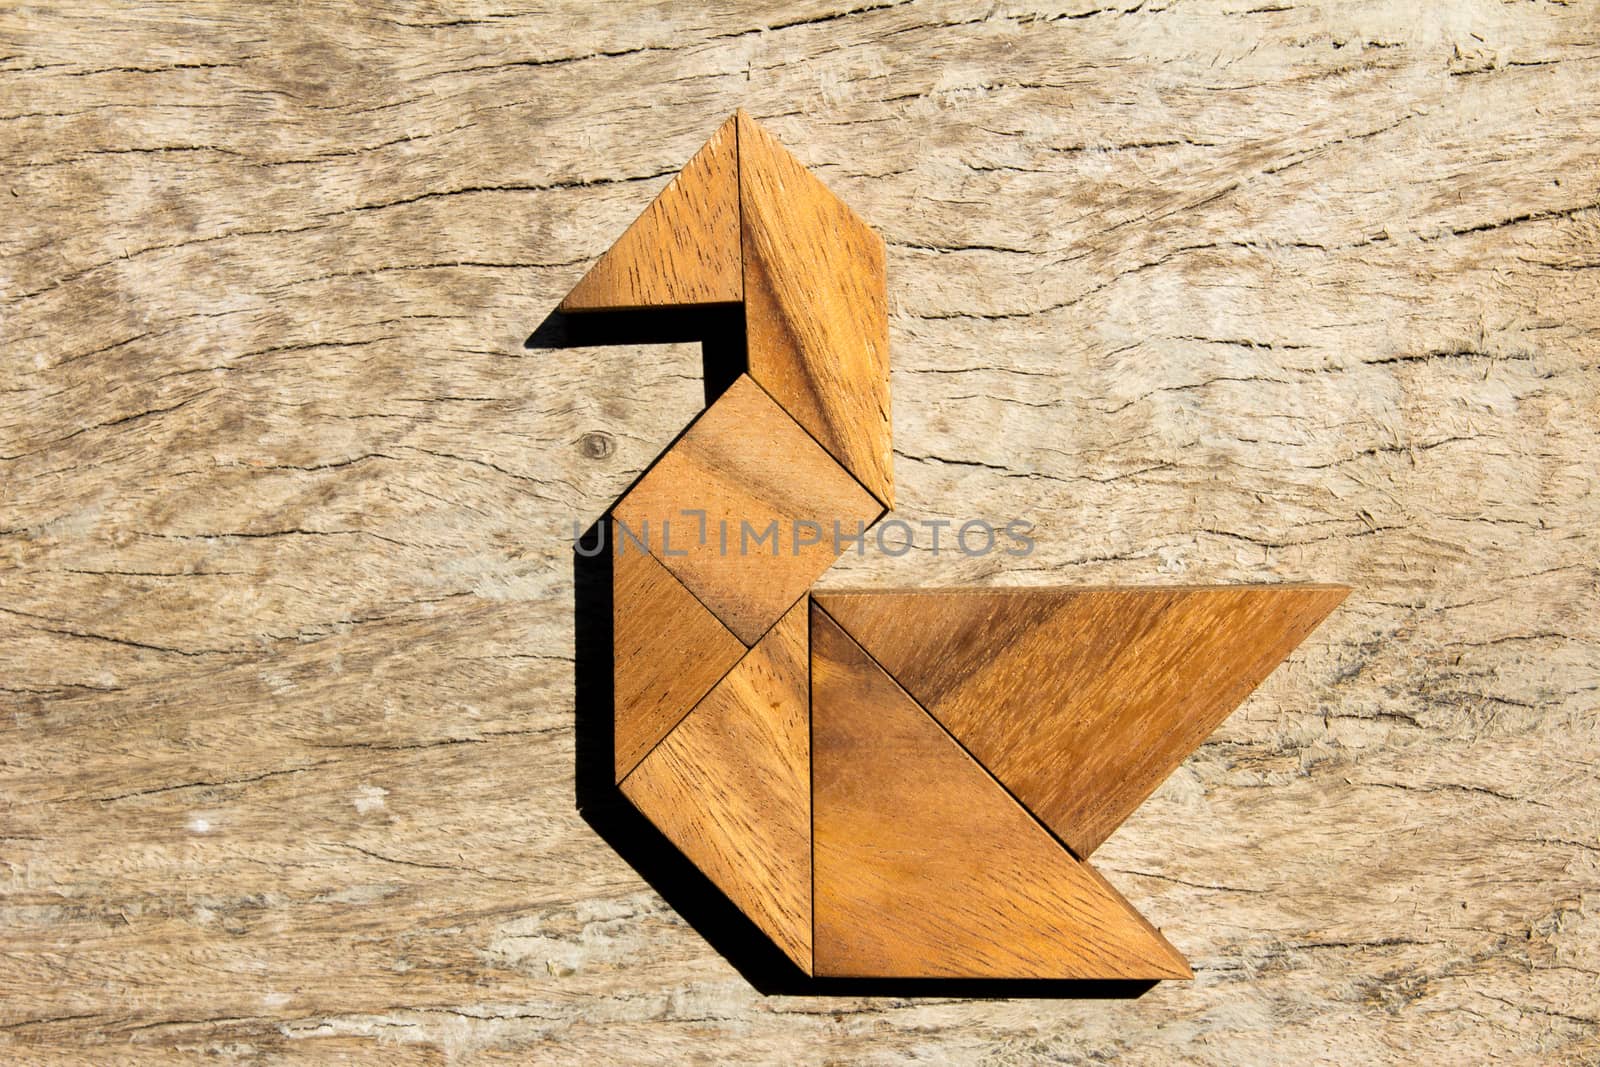 Wooden tangram puzzle in swan shape background by Hengpattanapong